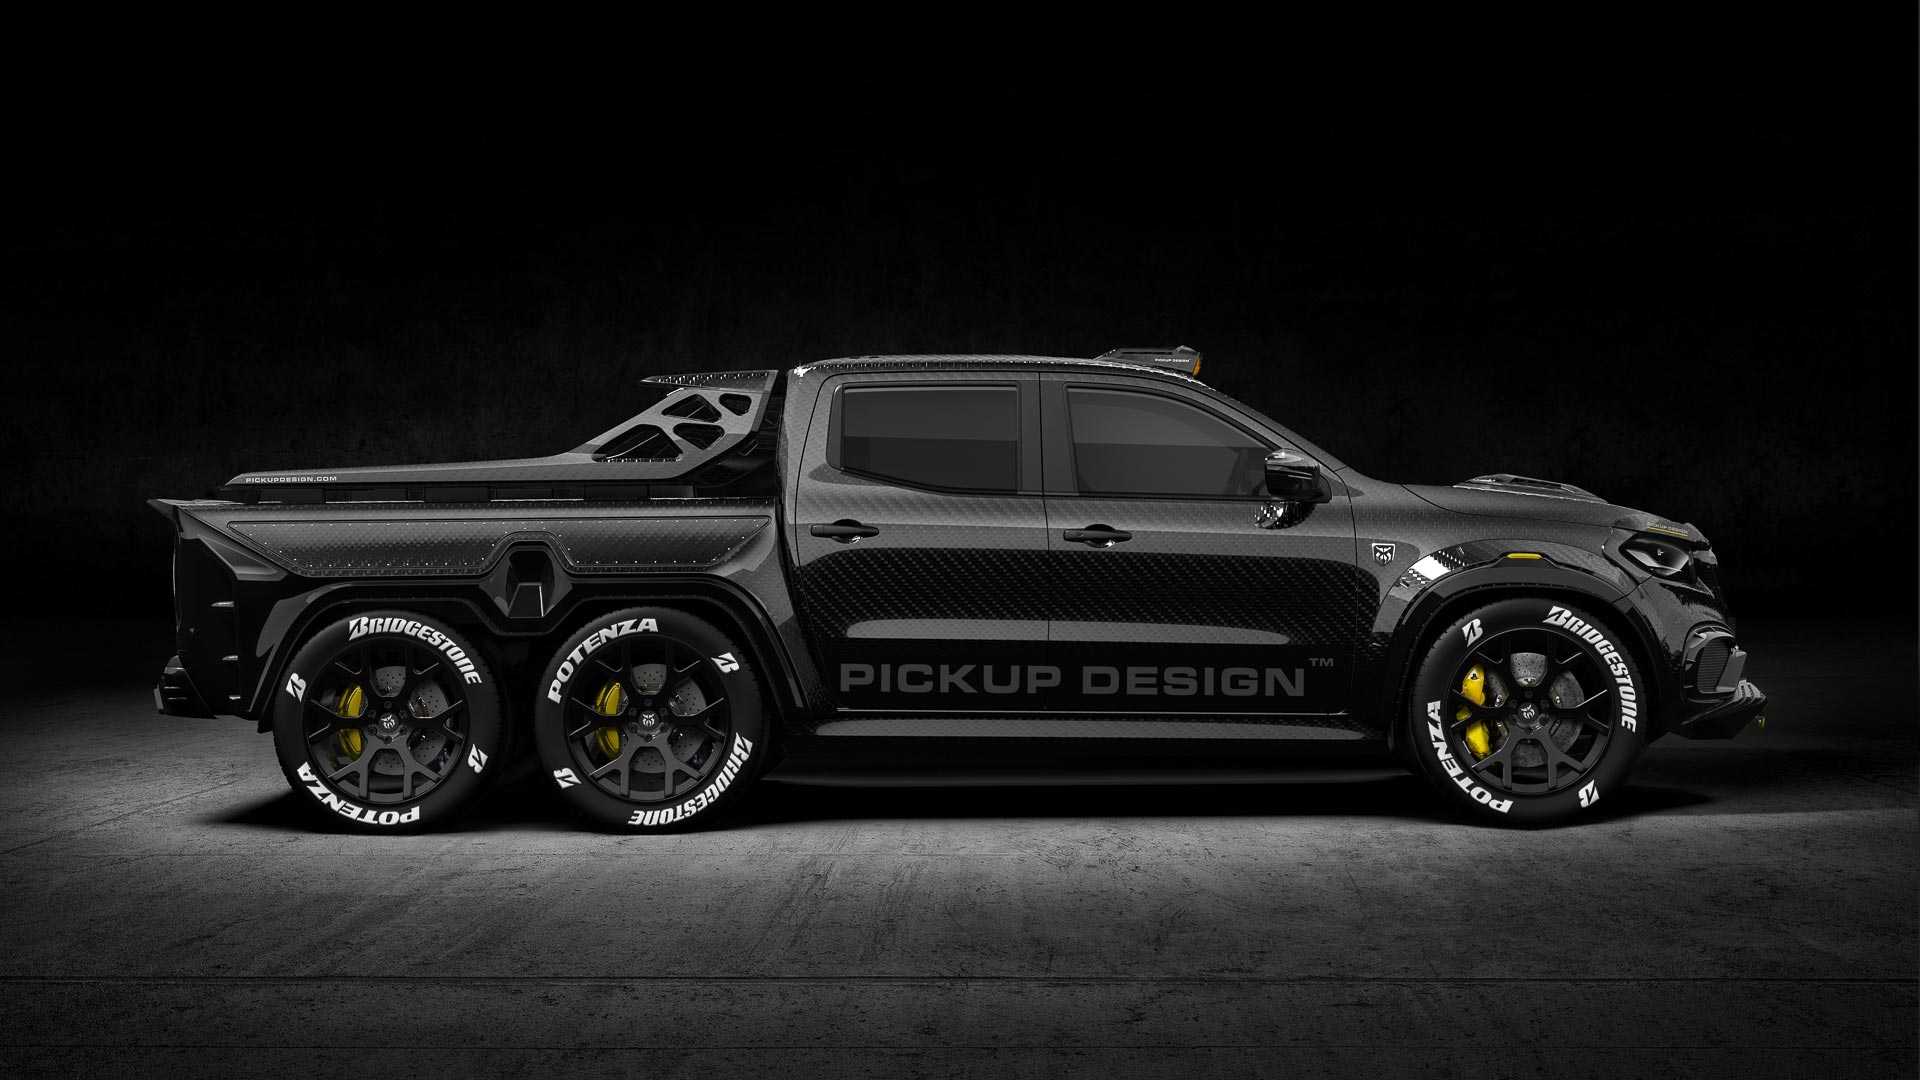 This 6-Wheeled Mercedes-Benz X Class Pickup Truck Mod Is Simply Outrageous